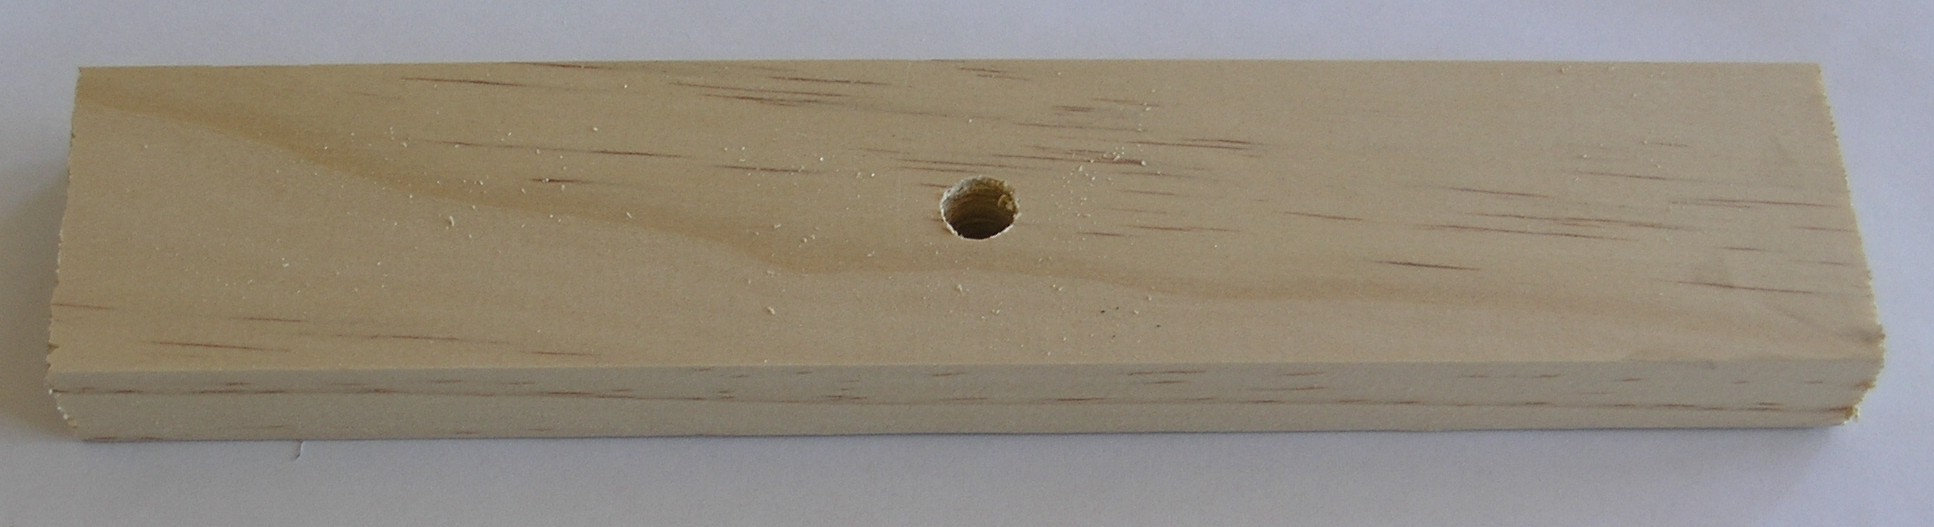 Block with hole